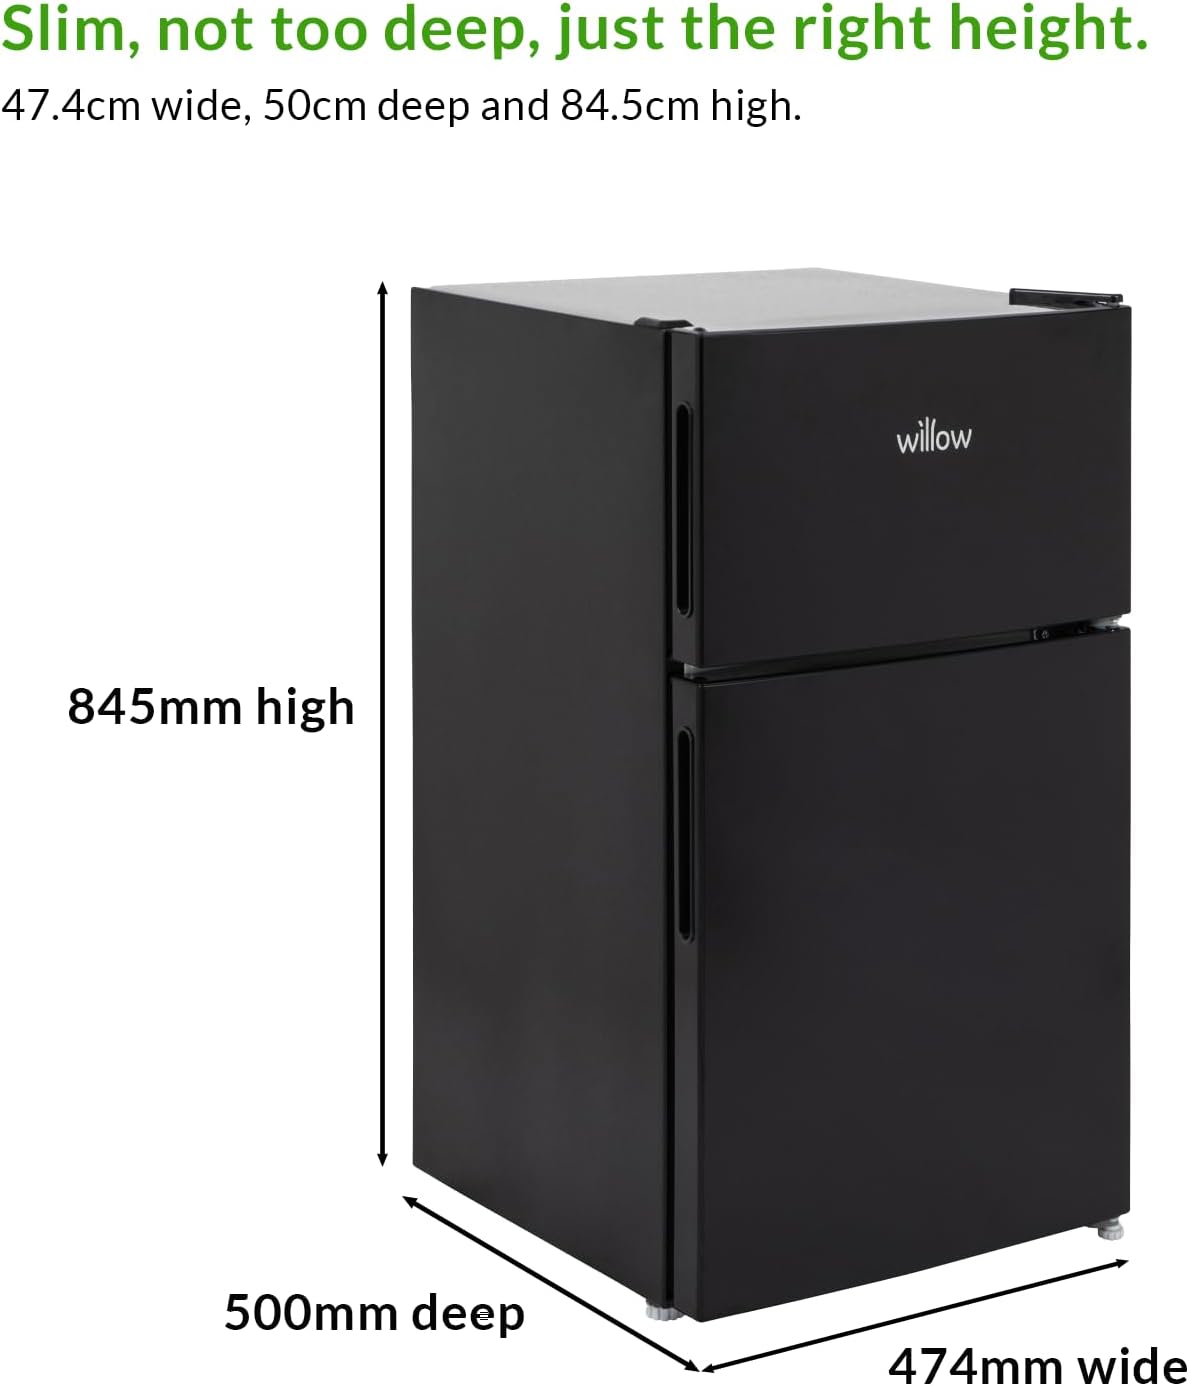 Willow WB50UCFF 86L Under Counter Fridge Freezer with 4* Freezer Rating, Adjustable Thermostat, Low Noise Level, 2 Years Warranty - Black - Amazing Gadgets Outlet